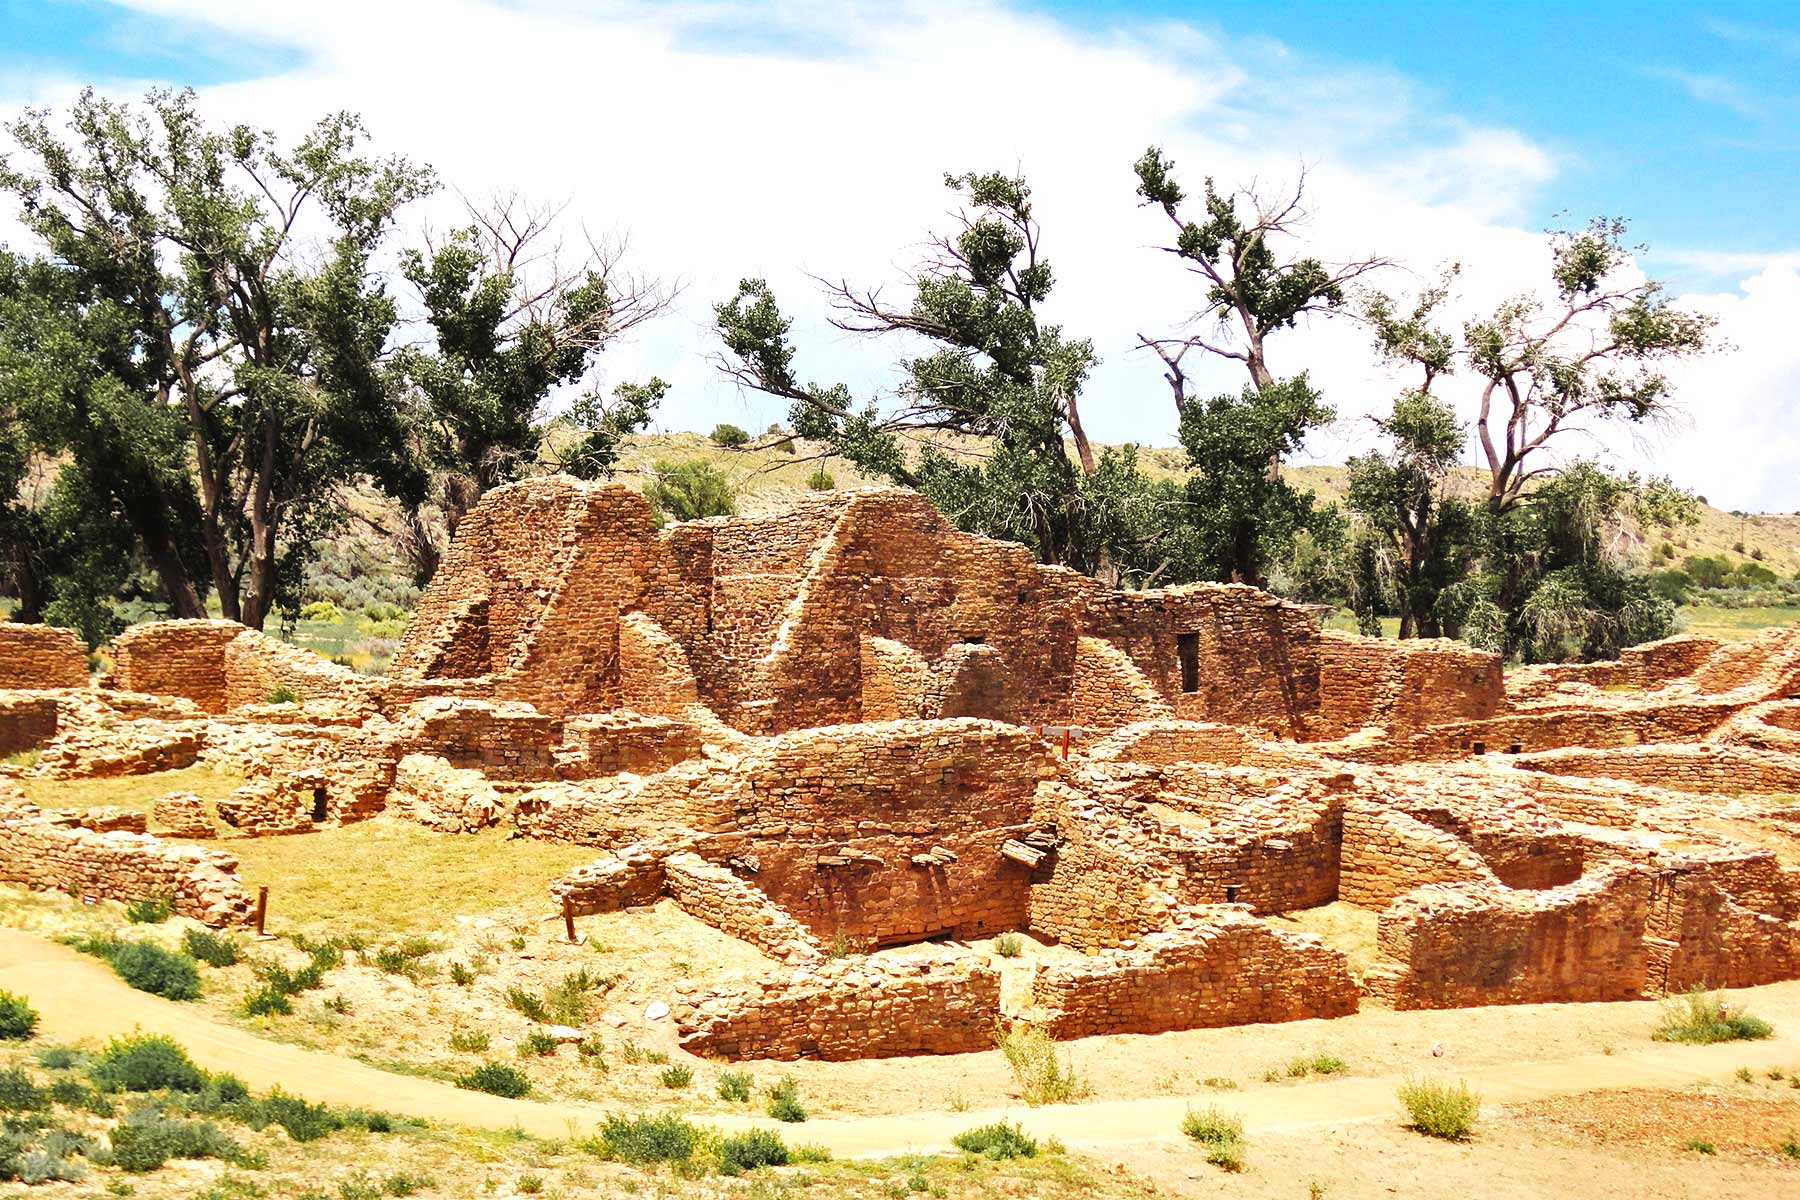 aztec ruins national monument, national parks near new mexico